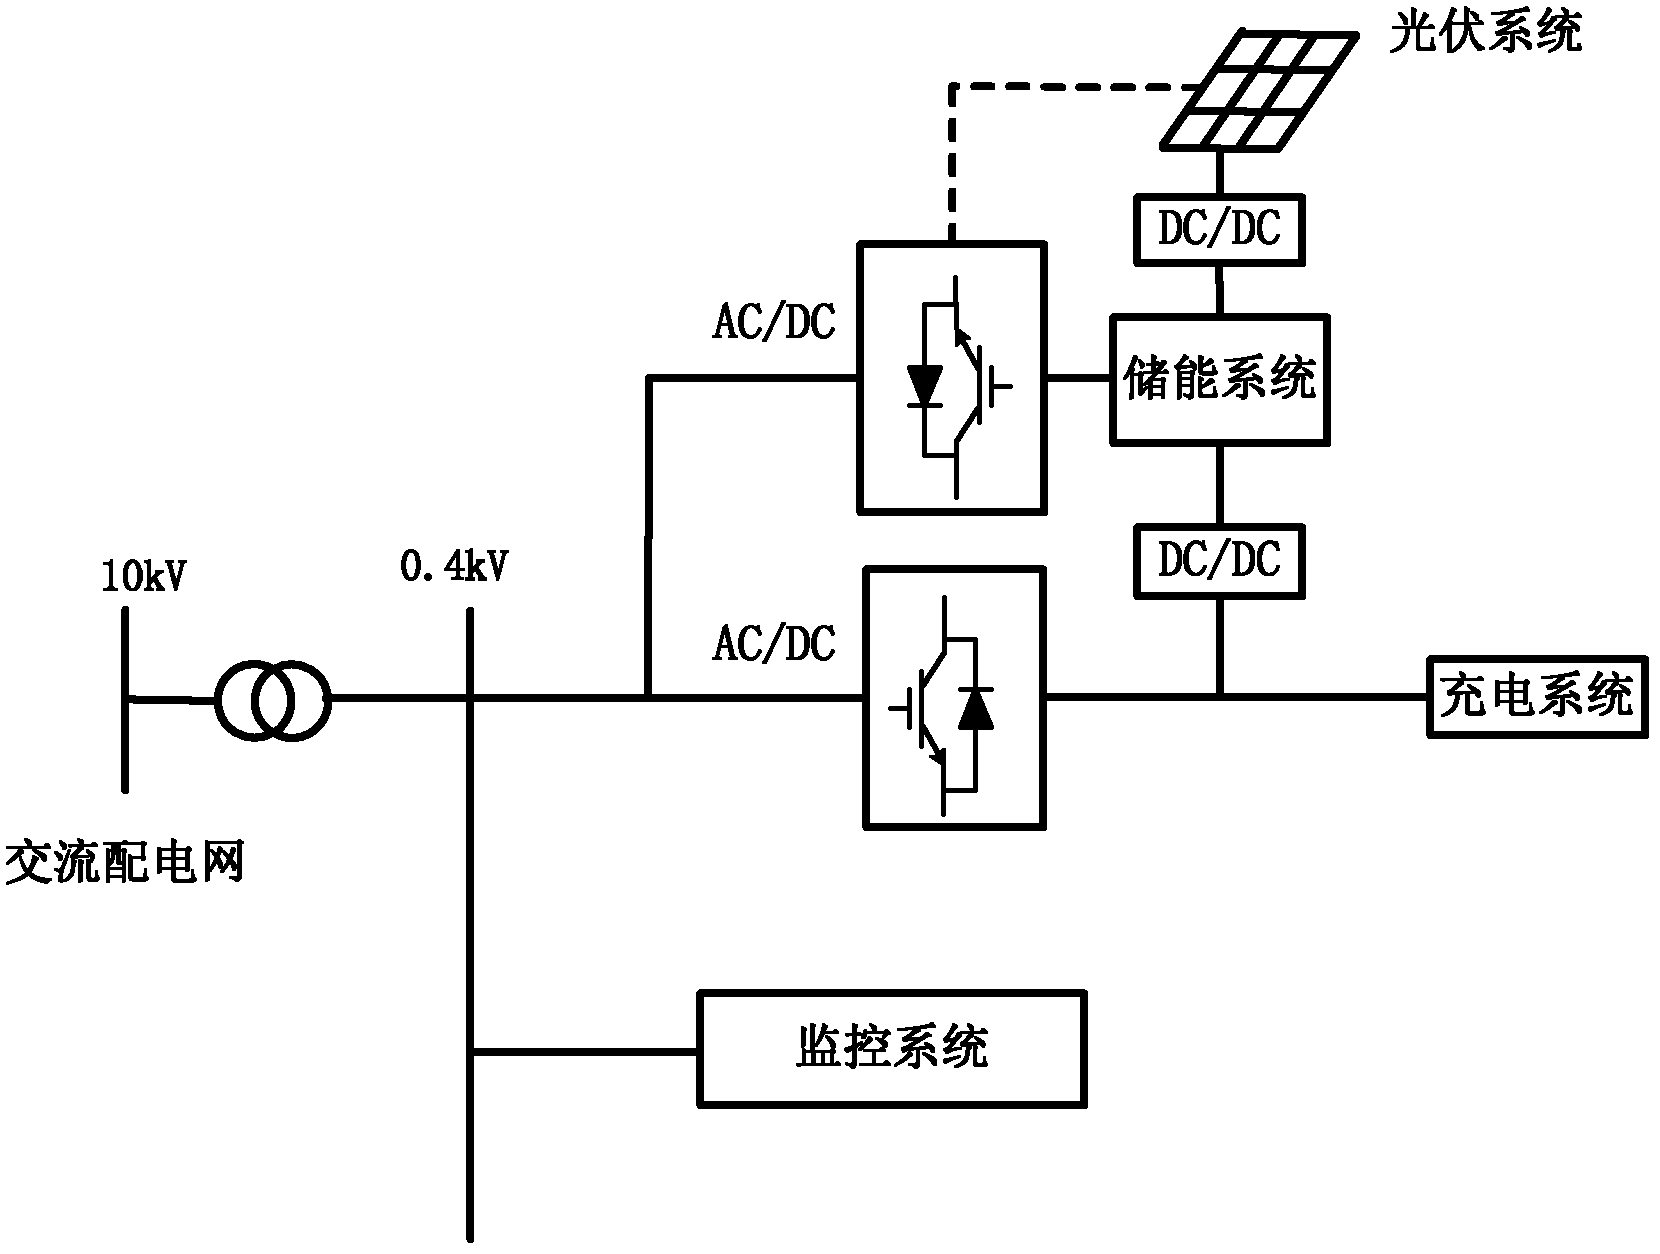 Photovoltaic energy storage electric automobile charging station system and method for switching state of energy storage system